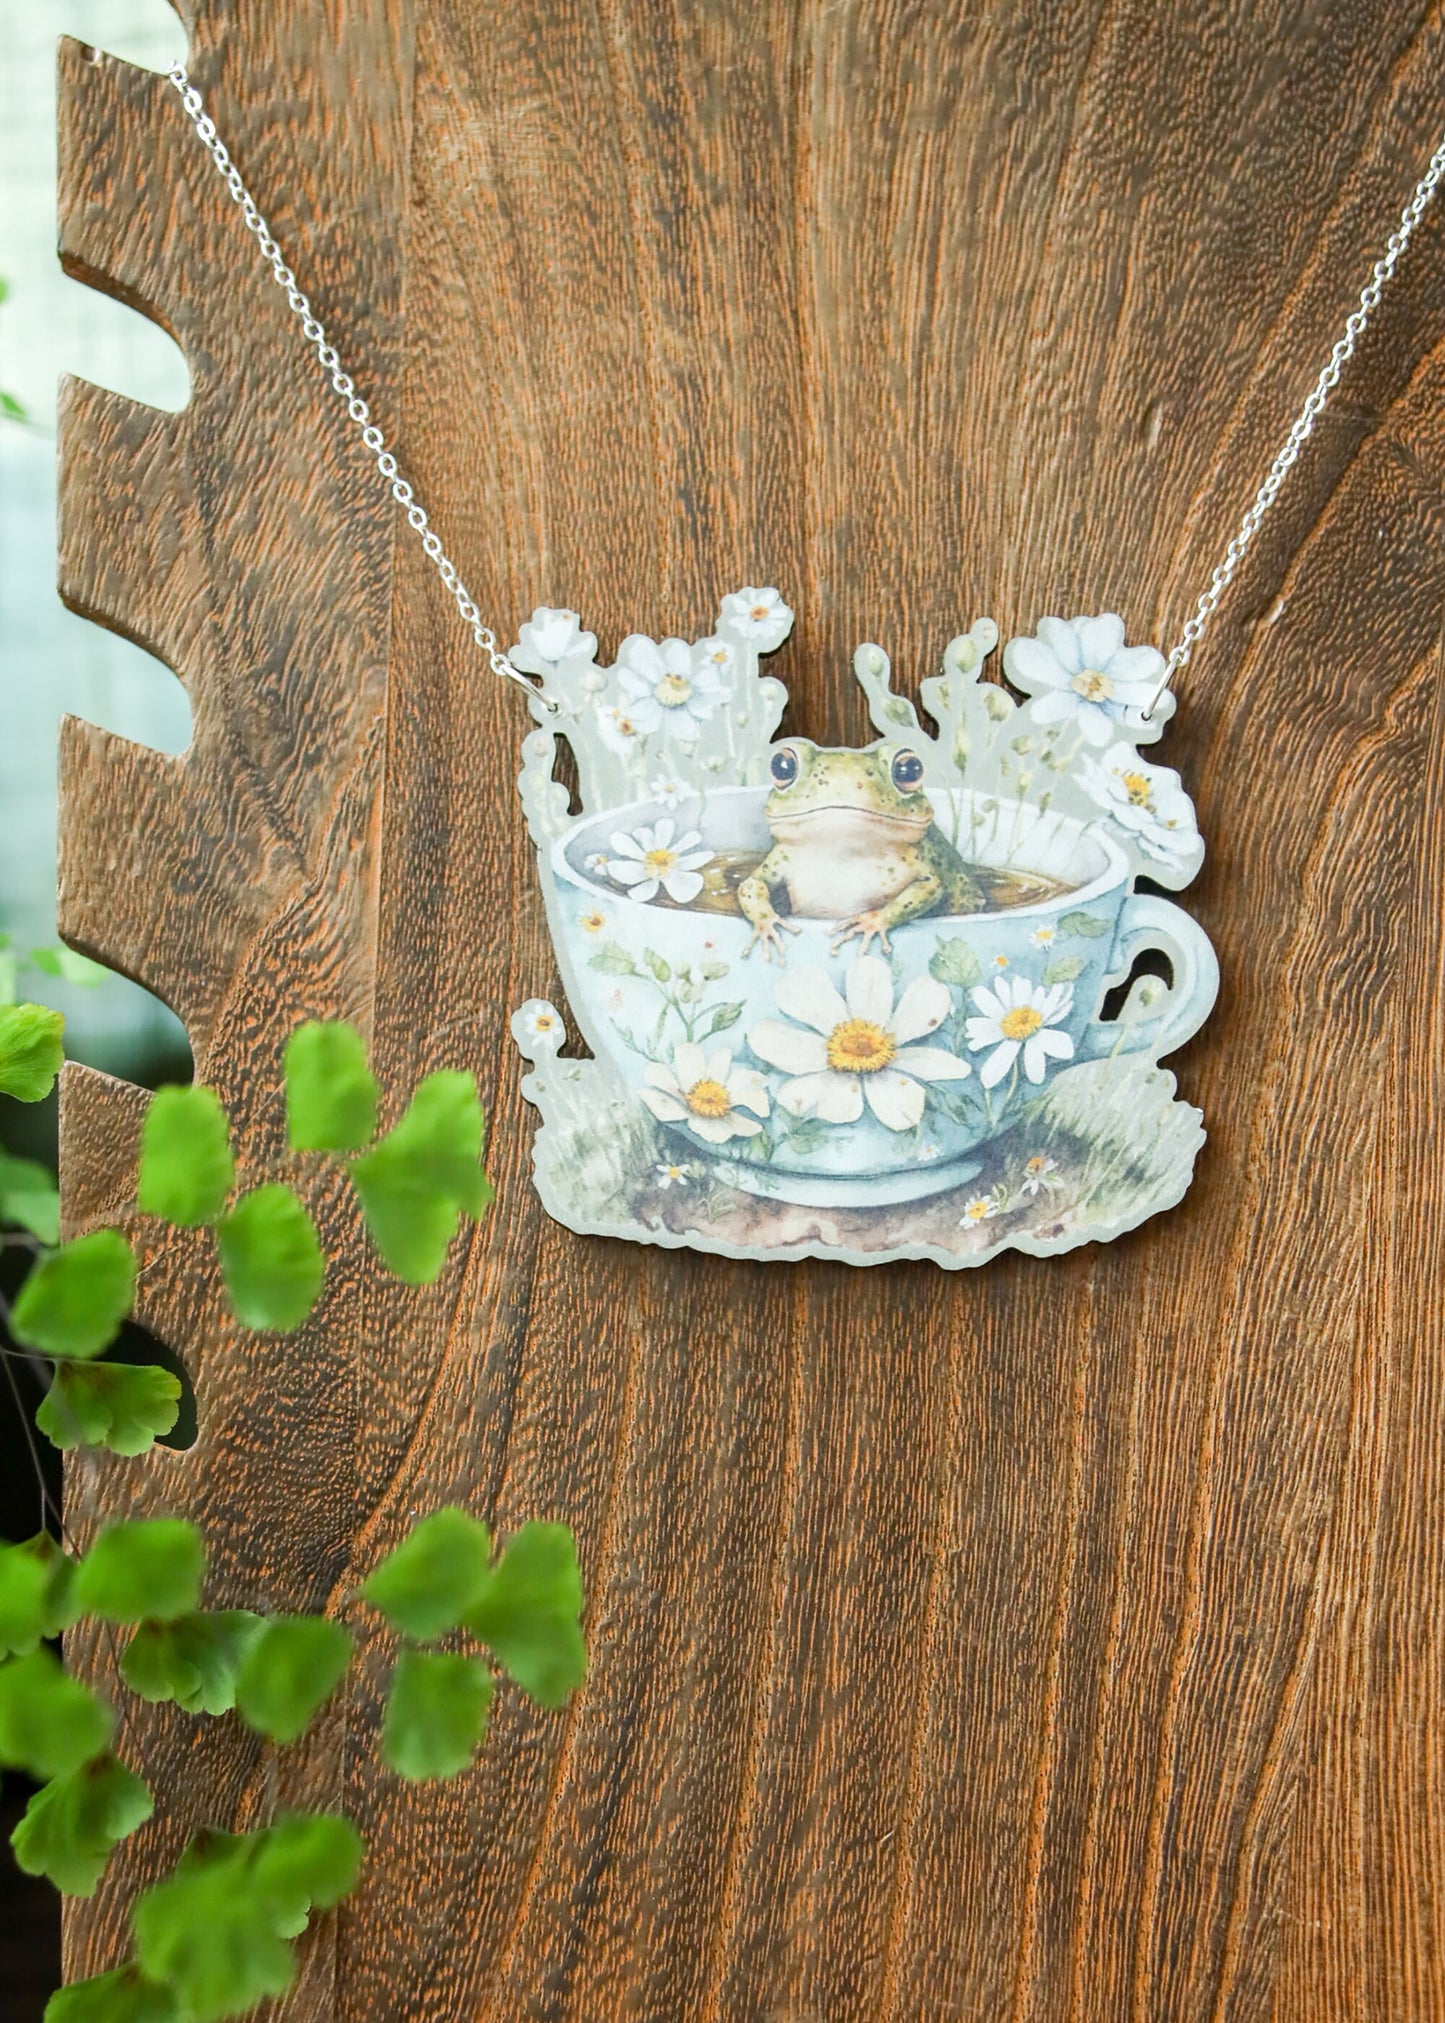 Teacup Critter Pendants | Boho Cottagecore Animal Necklace | Whimsical Fantasy Floral Kawaii Jewelry | Frog Toad Raccoon Tea Time Art